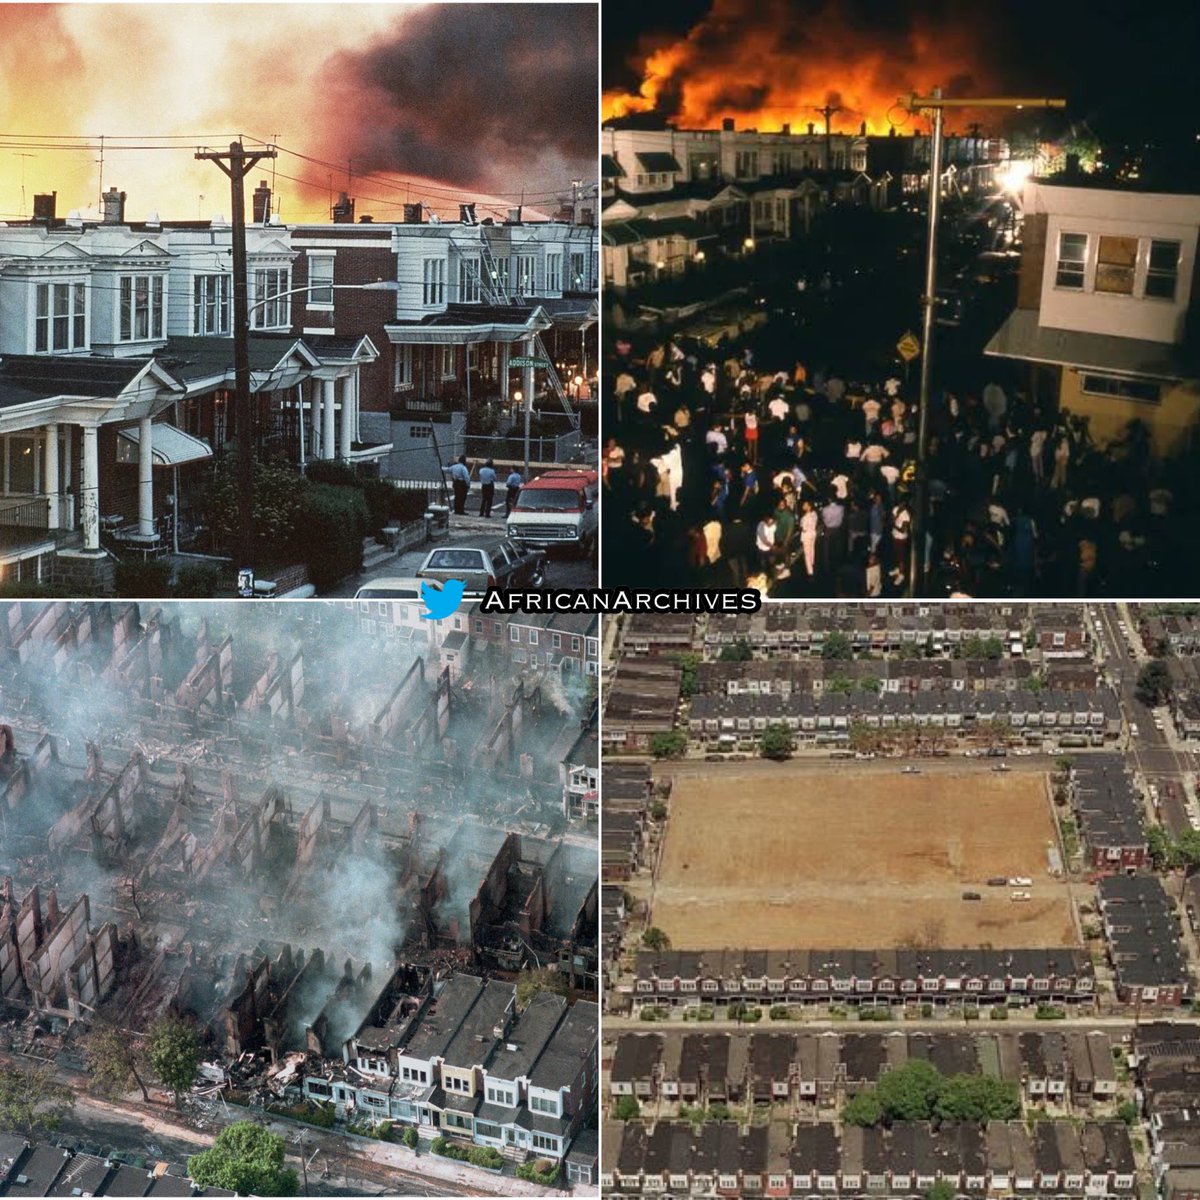 On this day in 1985, Philadelphia Police Department dropped a bomb onto a residential home occupied by the MOVE Organization. The Fire Department let the fire burn out of control, destroying 61 homes over two city blocks. 11 people died including 6 children THREAD